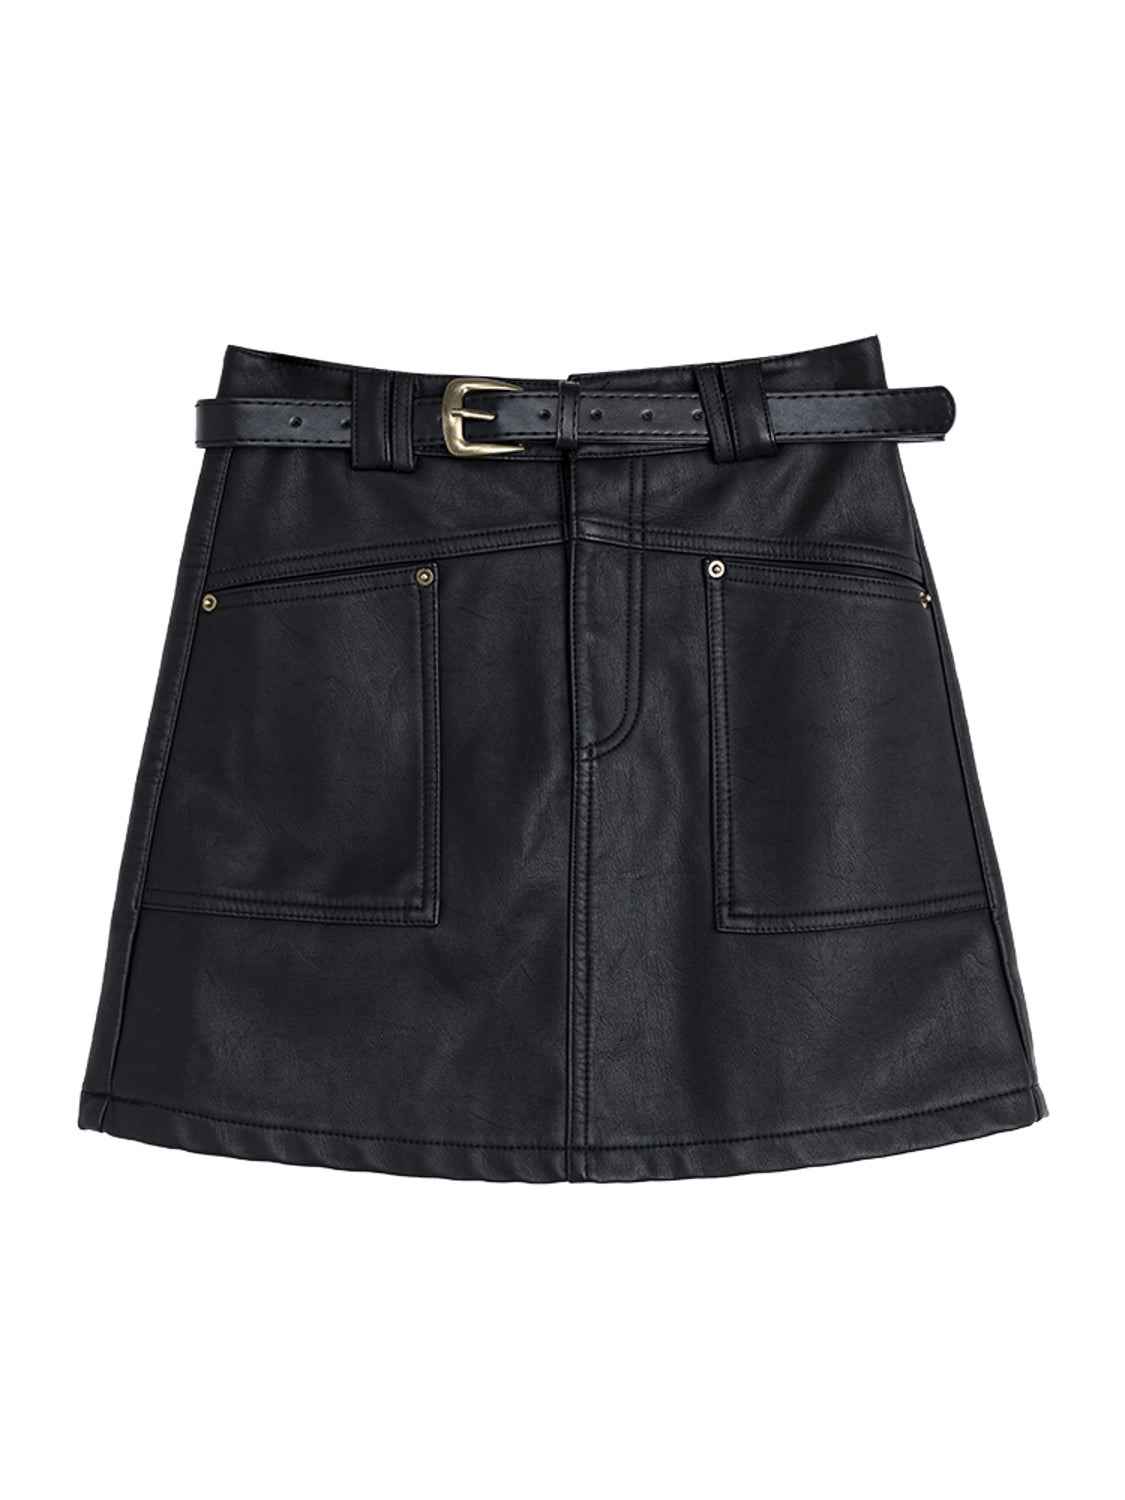 Women's Faux Leather Mini Skirt with Pocket Detail and Belt